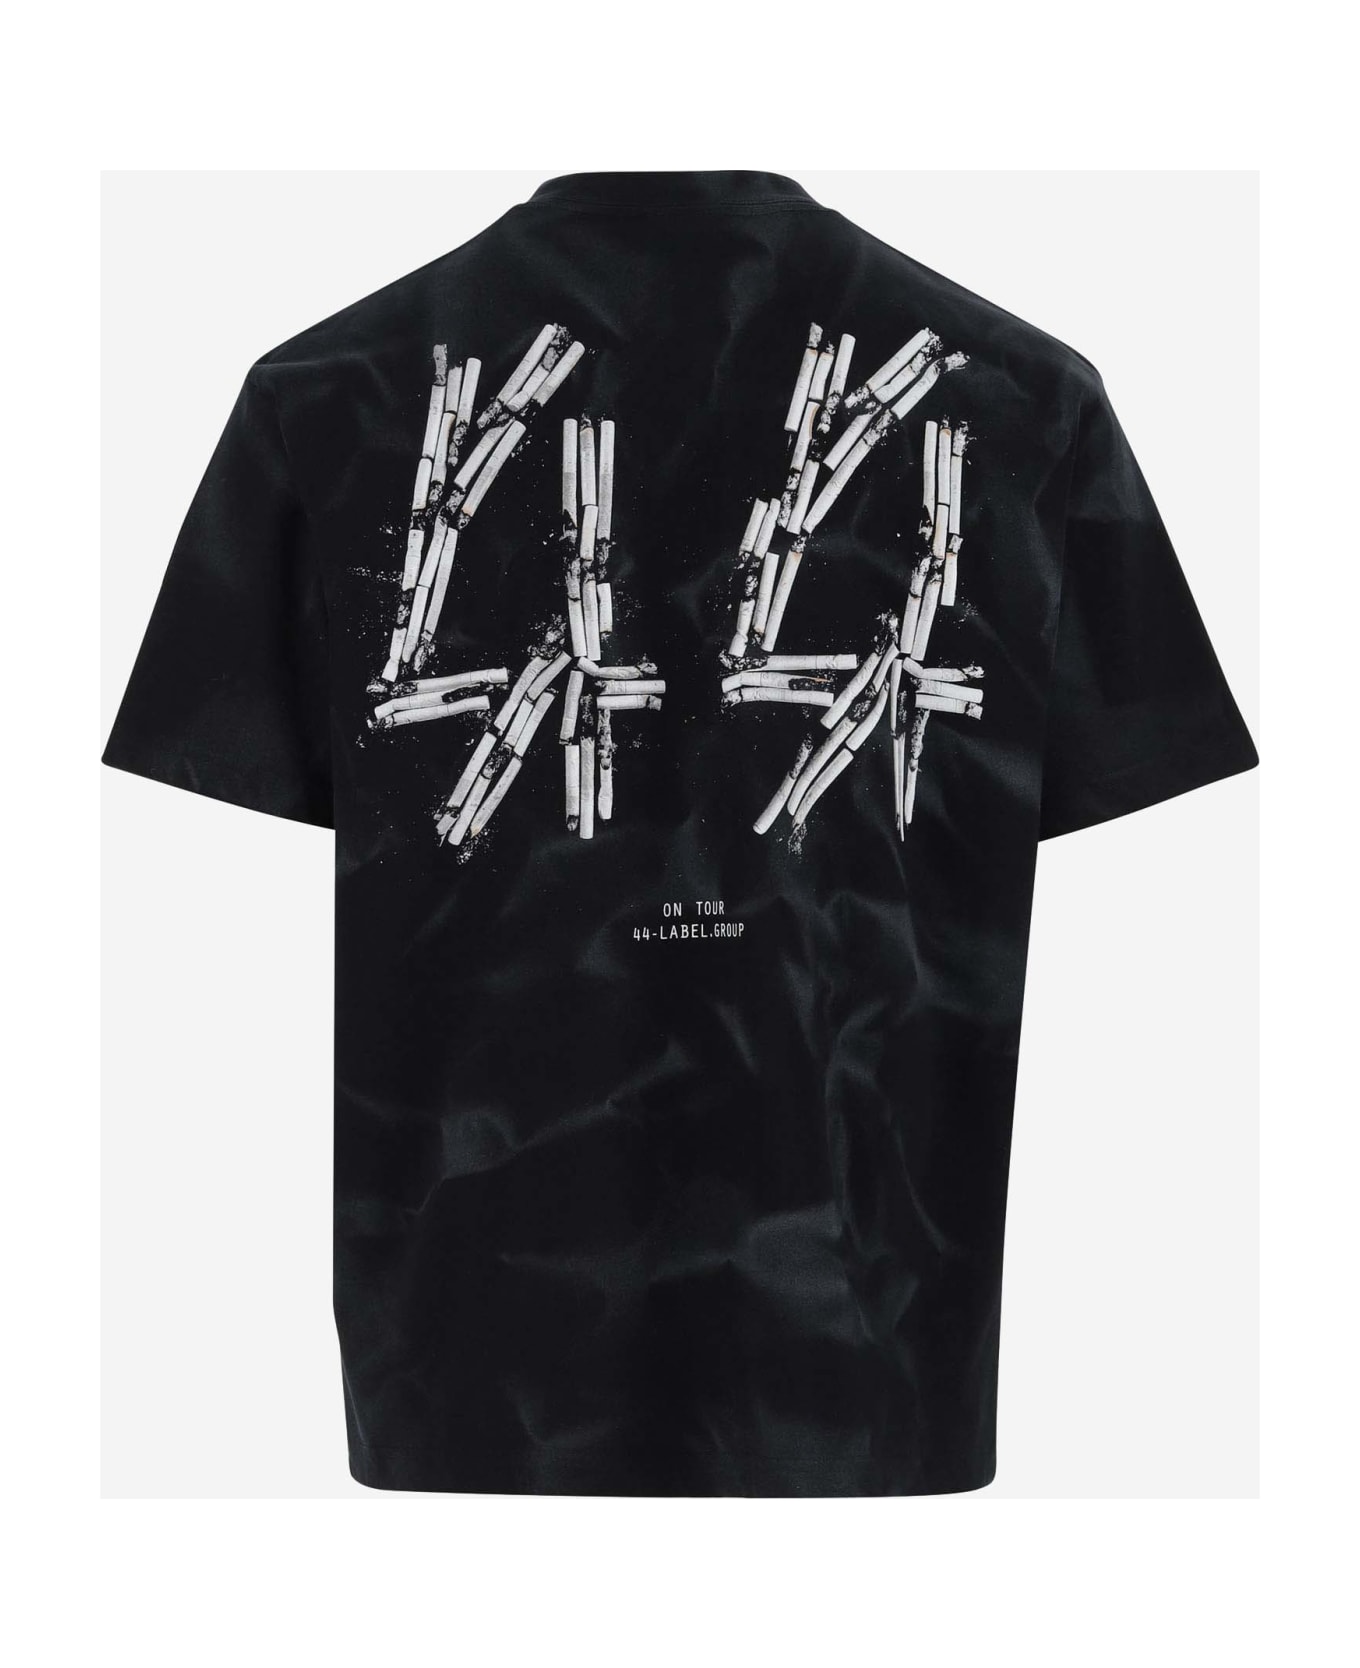 44 Label Group Cotton T-shirt With Graphic Print And Logo - Black